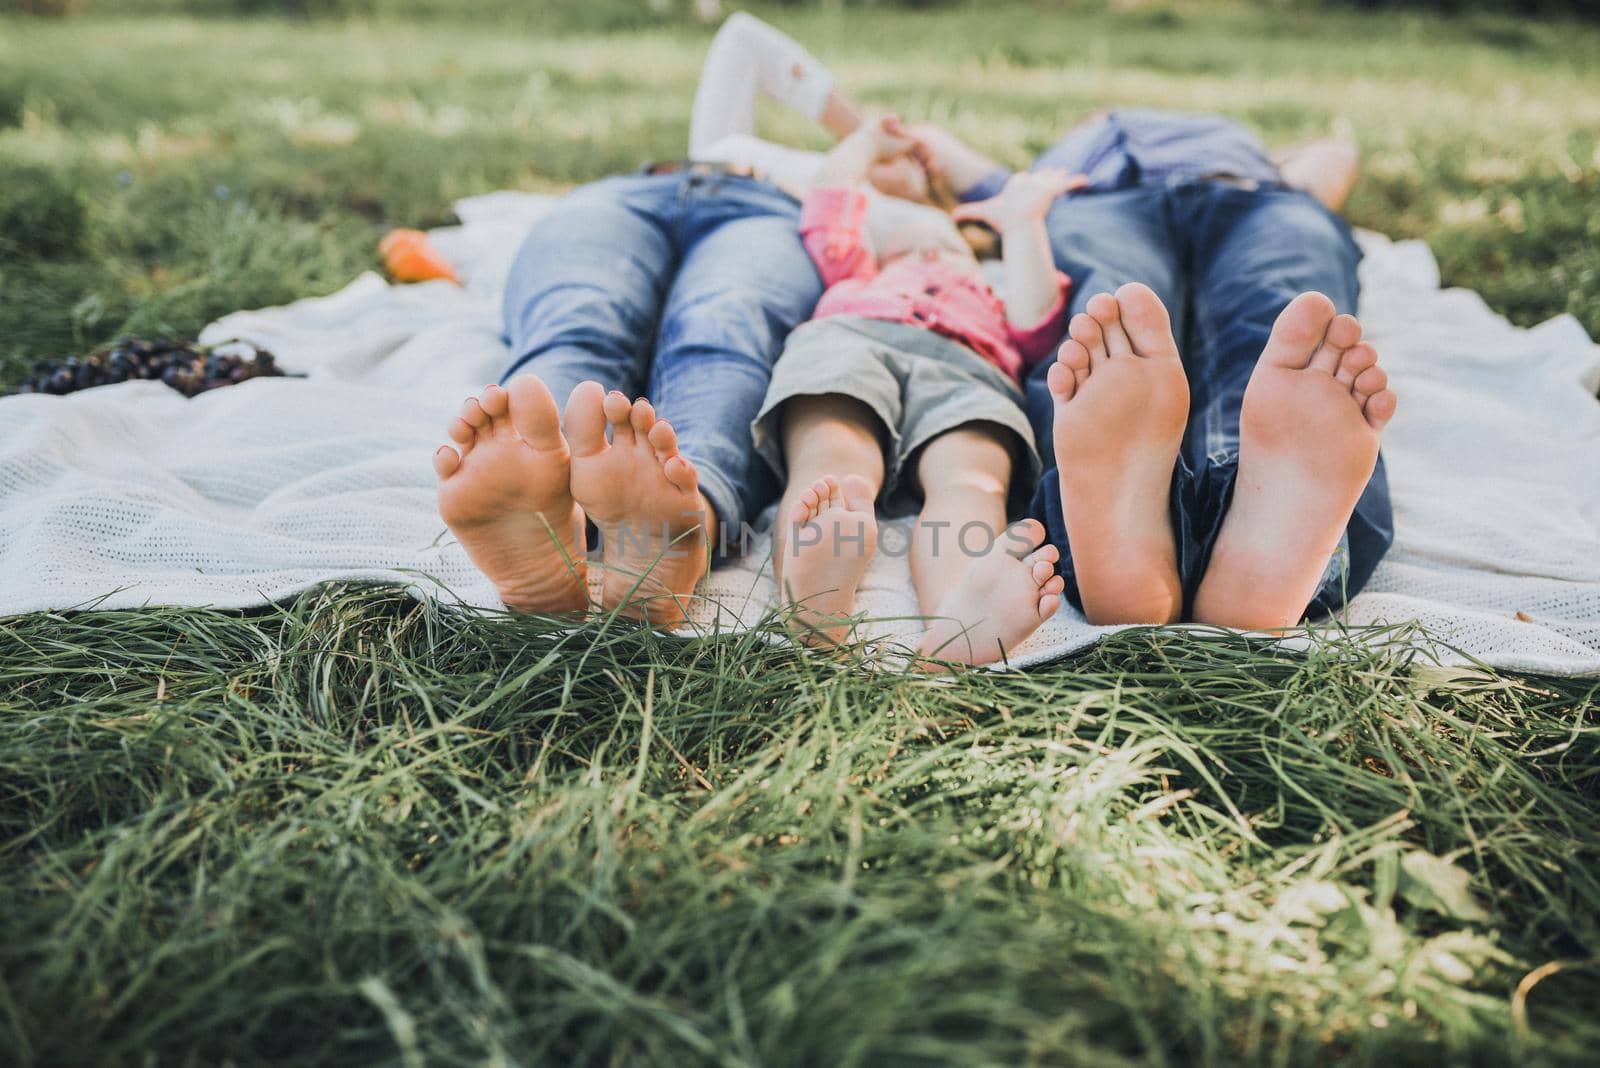 feet of a boy, mom and dad. lie on a white bedspread. Family picnic in summer in the park on green not mowed grass.